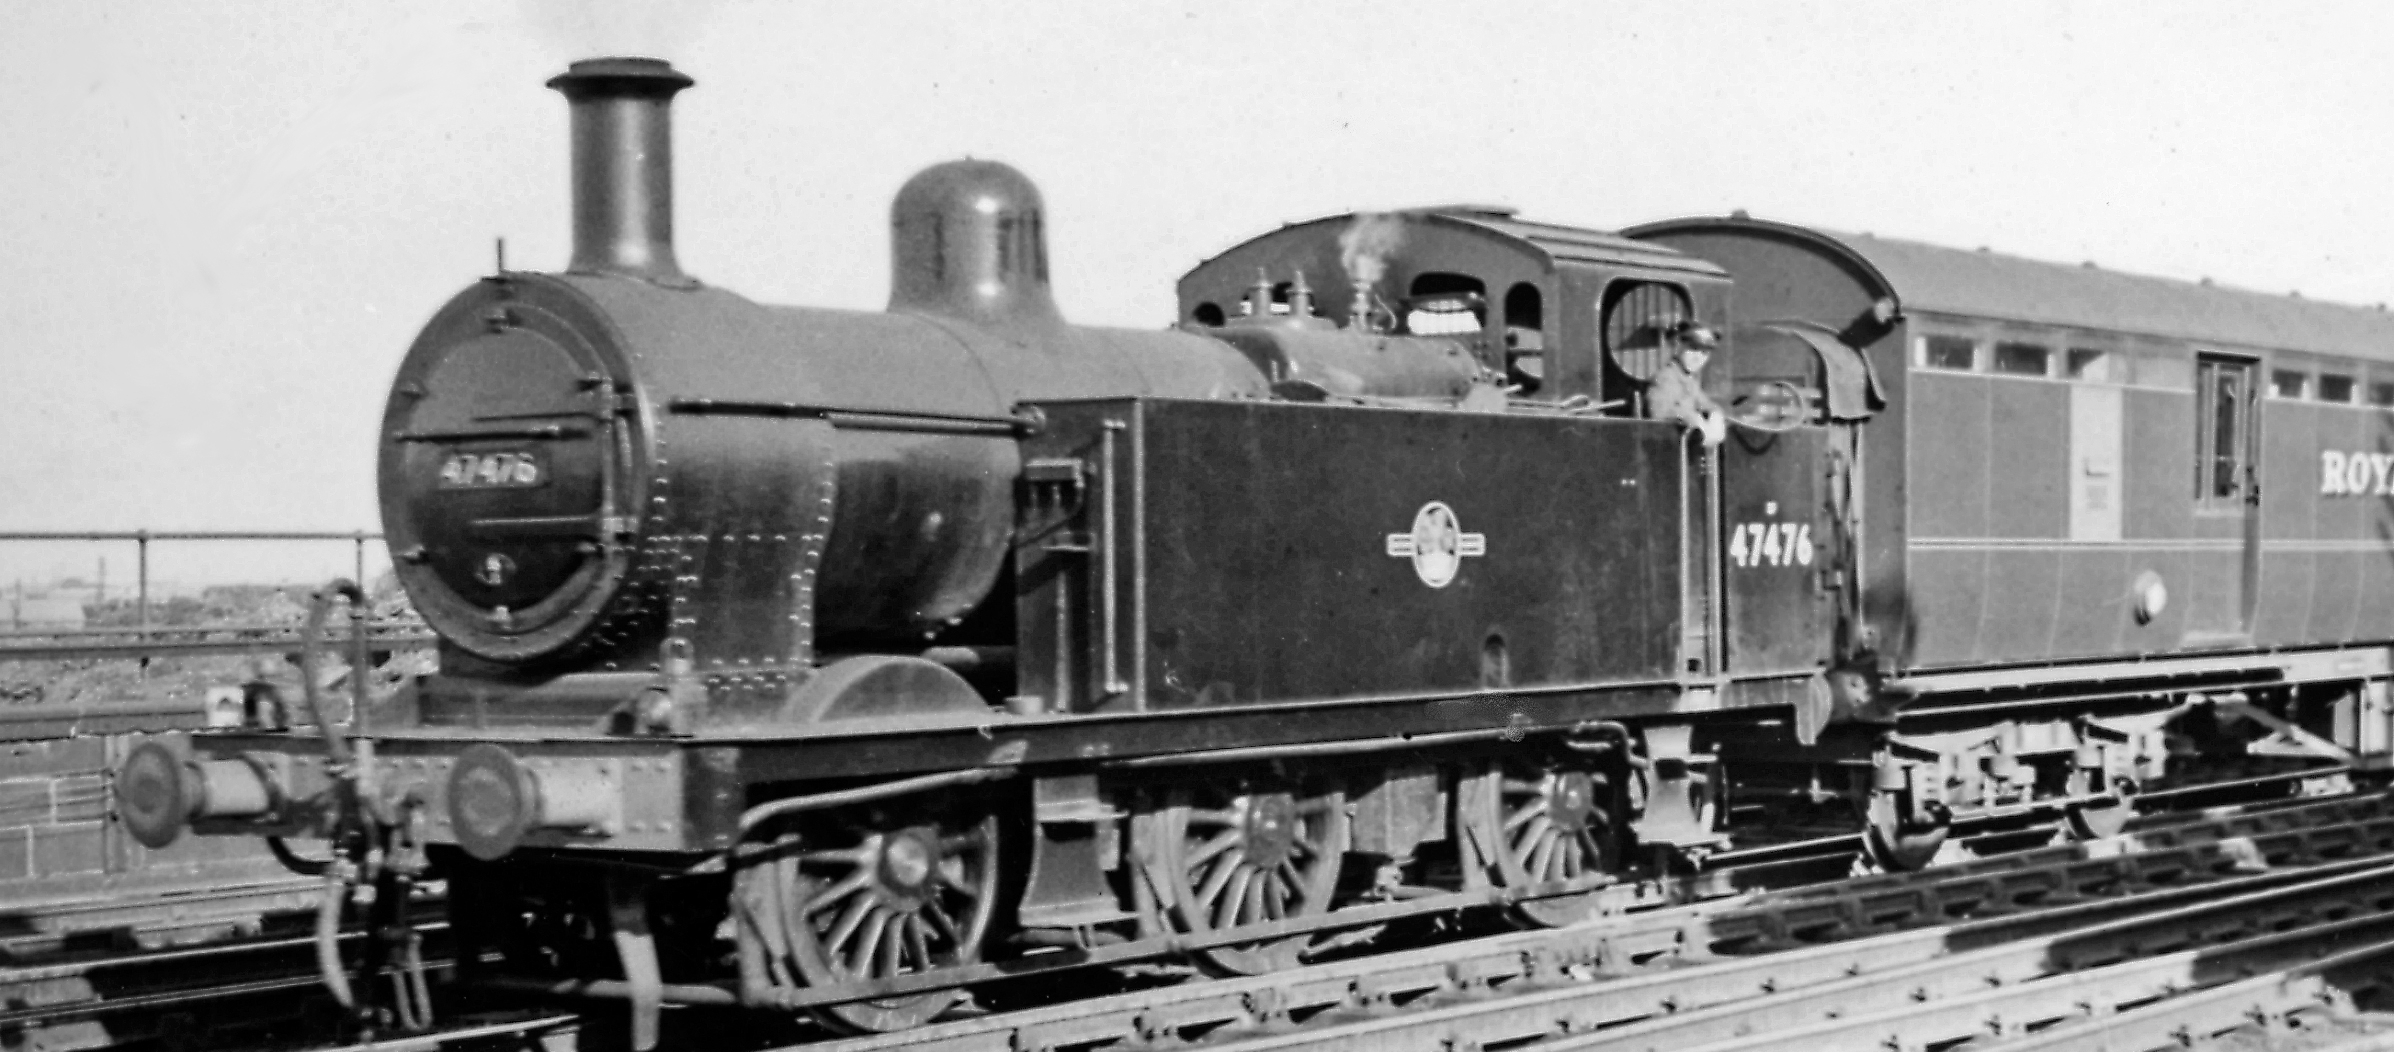 British Railways No. 47476 in June 1957 in front of a mail train